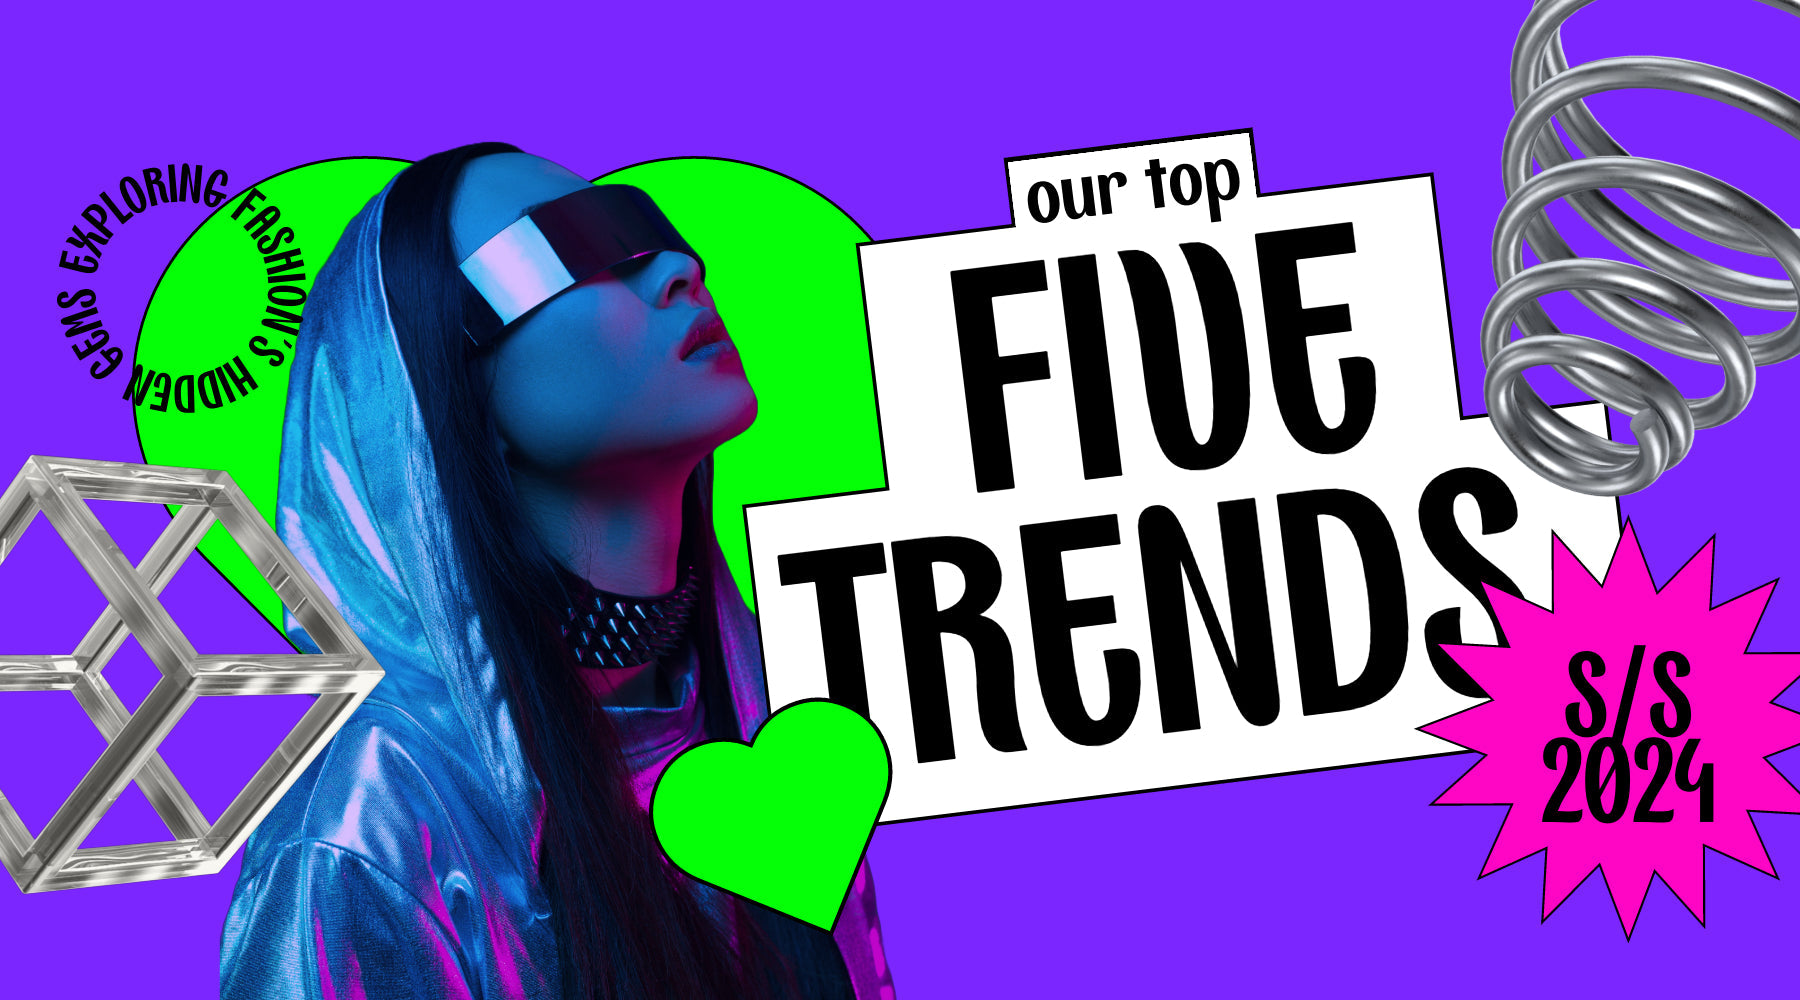 Main text reading "Our Top Five Trends S/S 2024". Smaller text reading " Exploring  fashion's hidden gems". Photo of a woman wearing futuristic visor sunglasses and a metallic hoodie. Hearts & abstract geometry graphics against a purple background. 